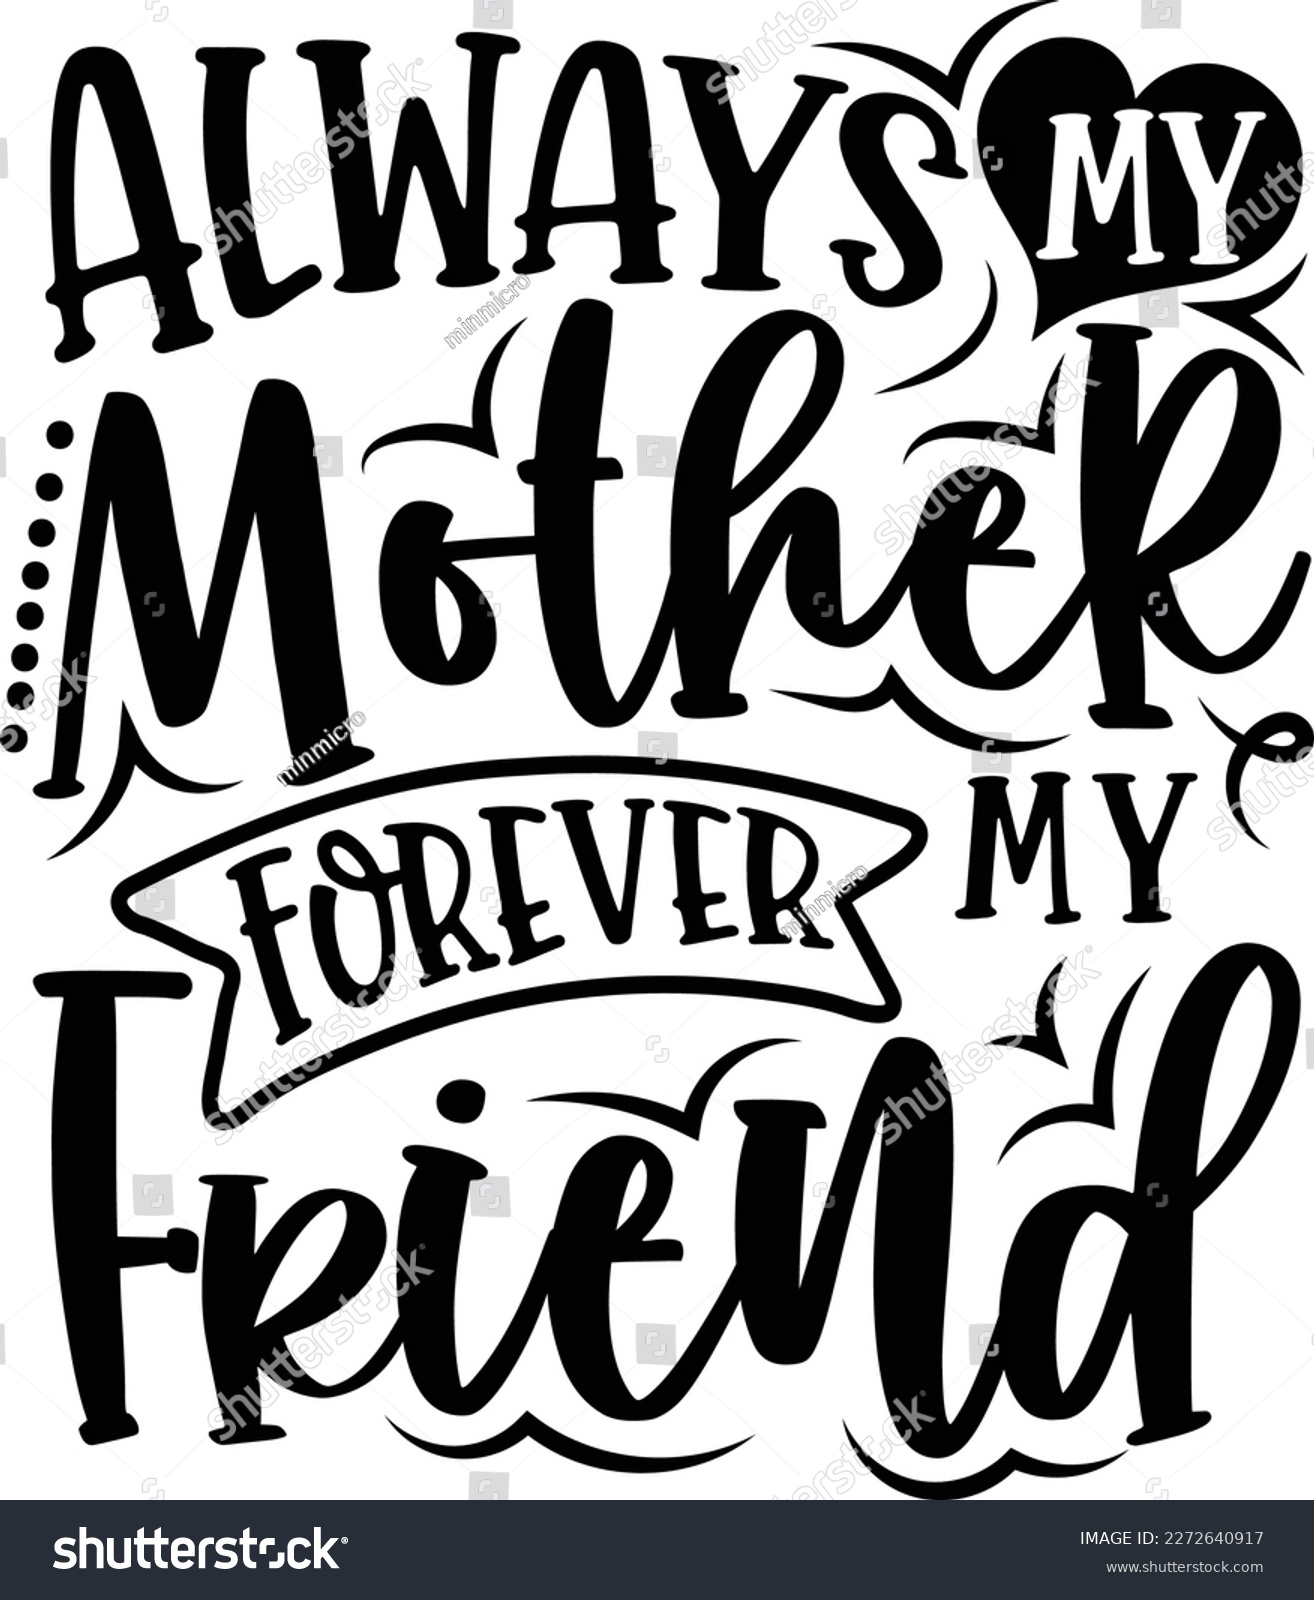 SVG of Always My Mom, Forever My Friend - Funny Hand Drawn Calligraphy Text For Shirts, Poster, Banner, Mug Etc. svg